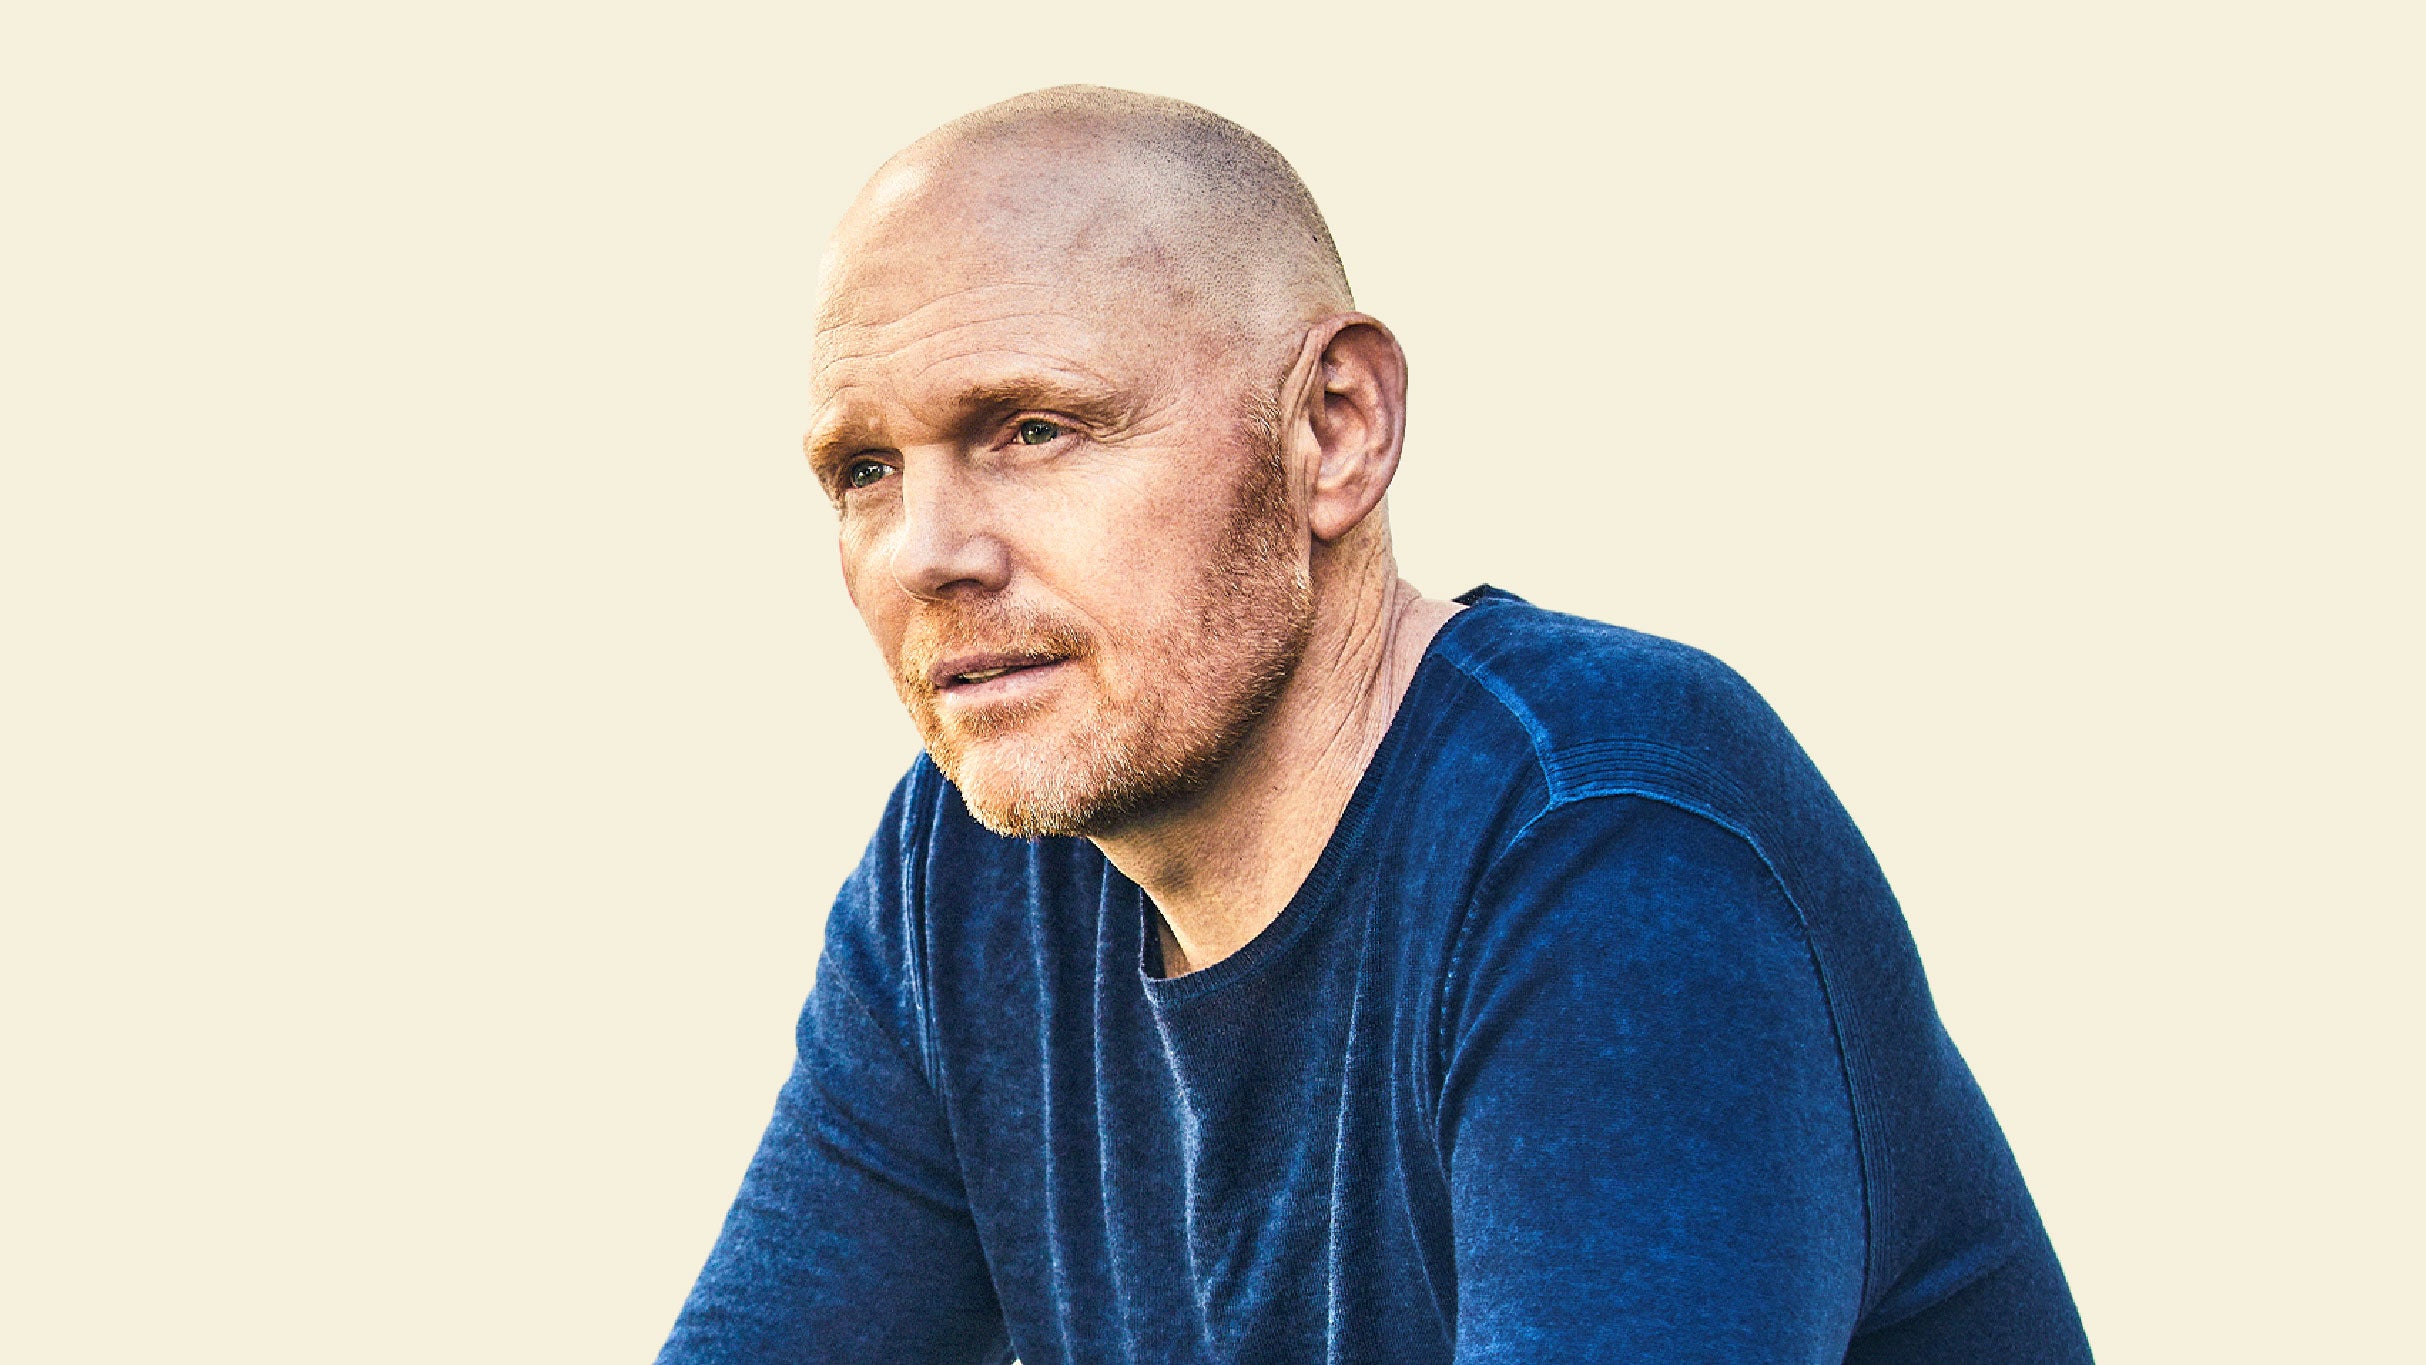 Bill Burr Live free presale info for show tickets in Manchester, NH (SNHU Arena)